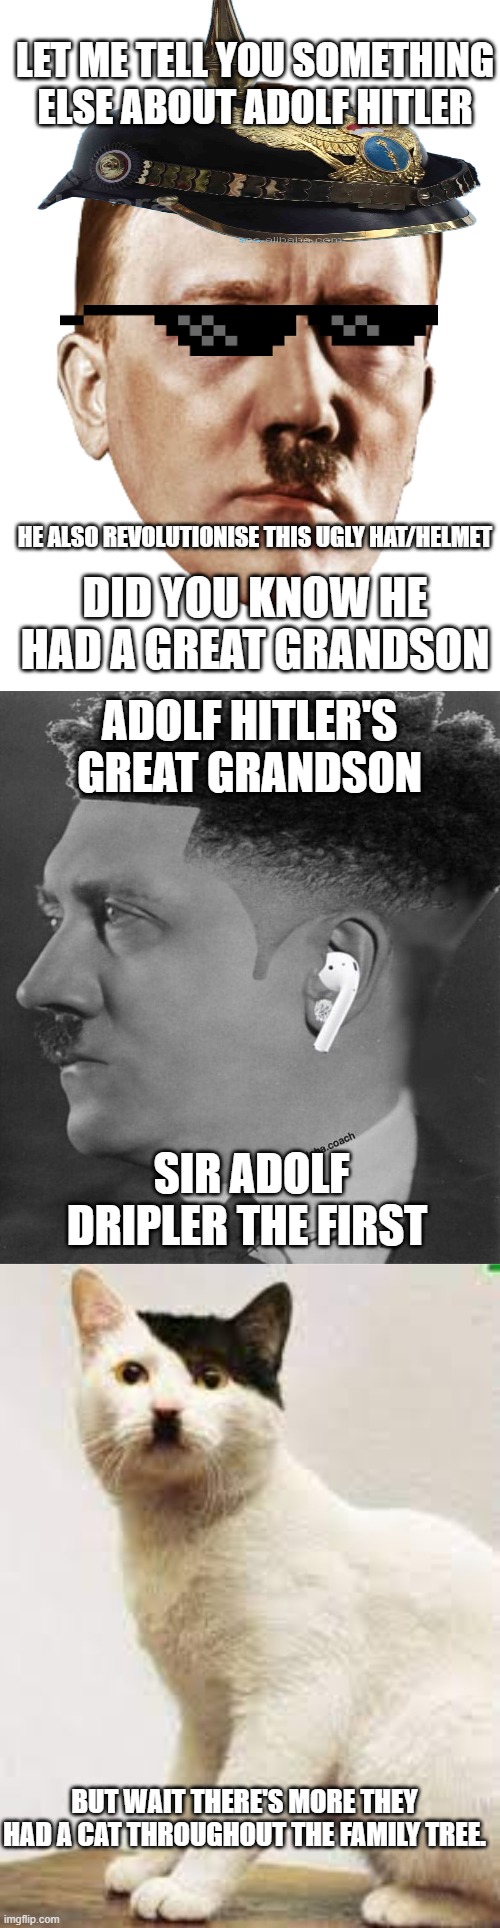 LET ME TELL YOU SOMETHING ELSE ABOUT ADOLF HITLER; HE ALSO REVOLUTIONISE THIS UGLY HAT/HELMET; DID YOU KNOW HE HAD A GREAT GRANDSON; ADOLF HITLER'S GREAT GRANDSON; SIR ADOLF DRIPLER THE FIRST; BUT WAIT THERE'S MORE THEY HAD A CAT THROUGHOUT THE FAMILY TREE. | image tagged in hitler face | made w/ Imgflip meme maker